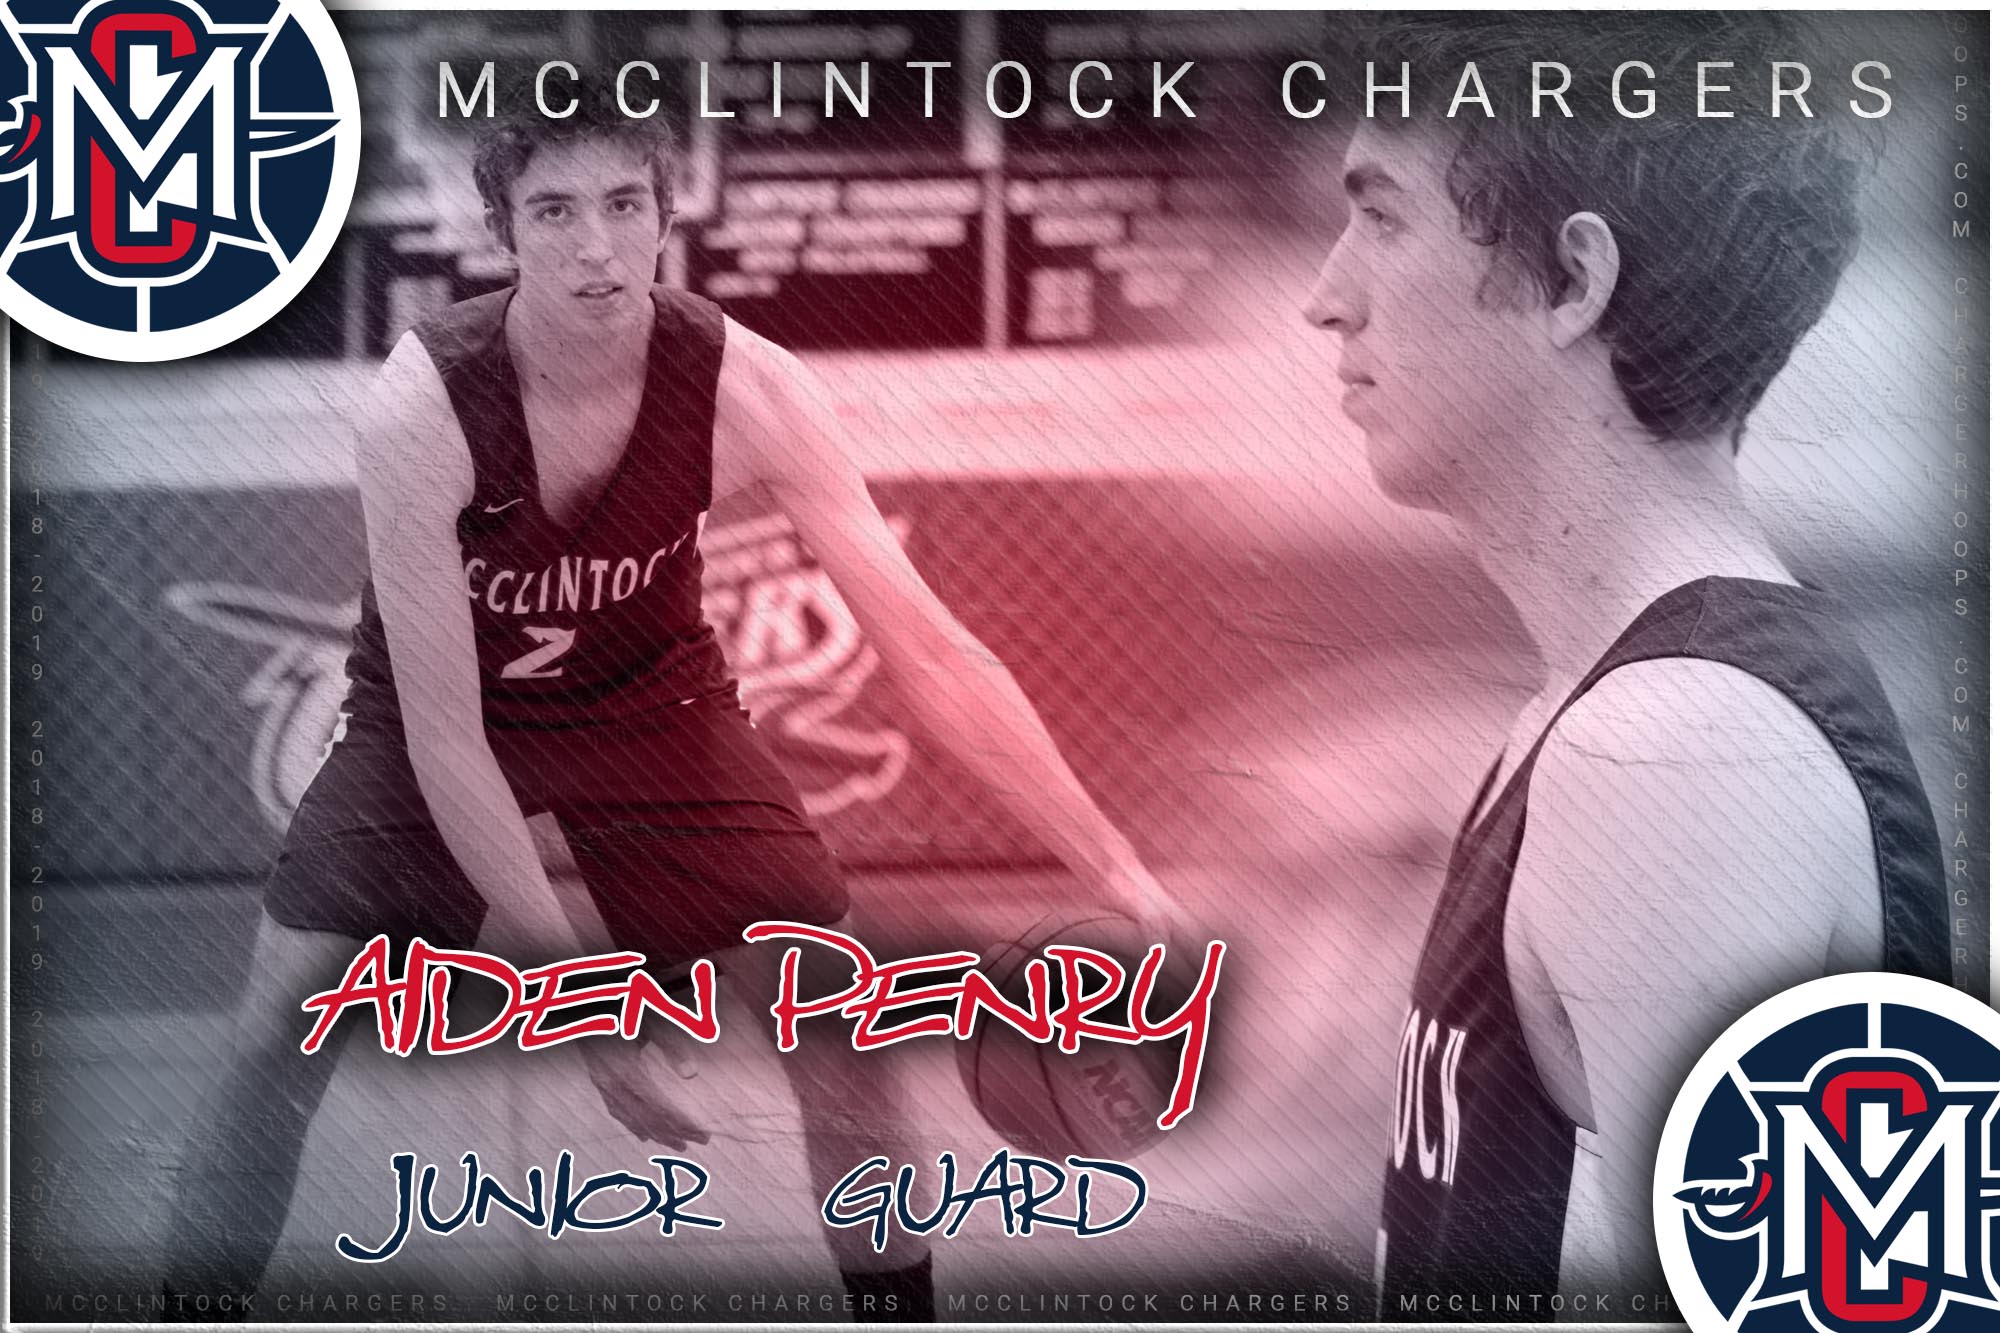 McClintock Chargers Basketball- Aiden Penry